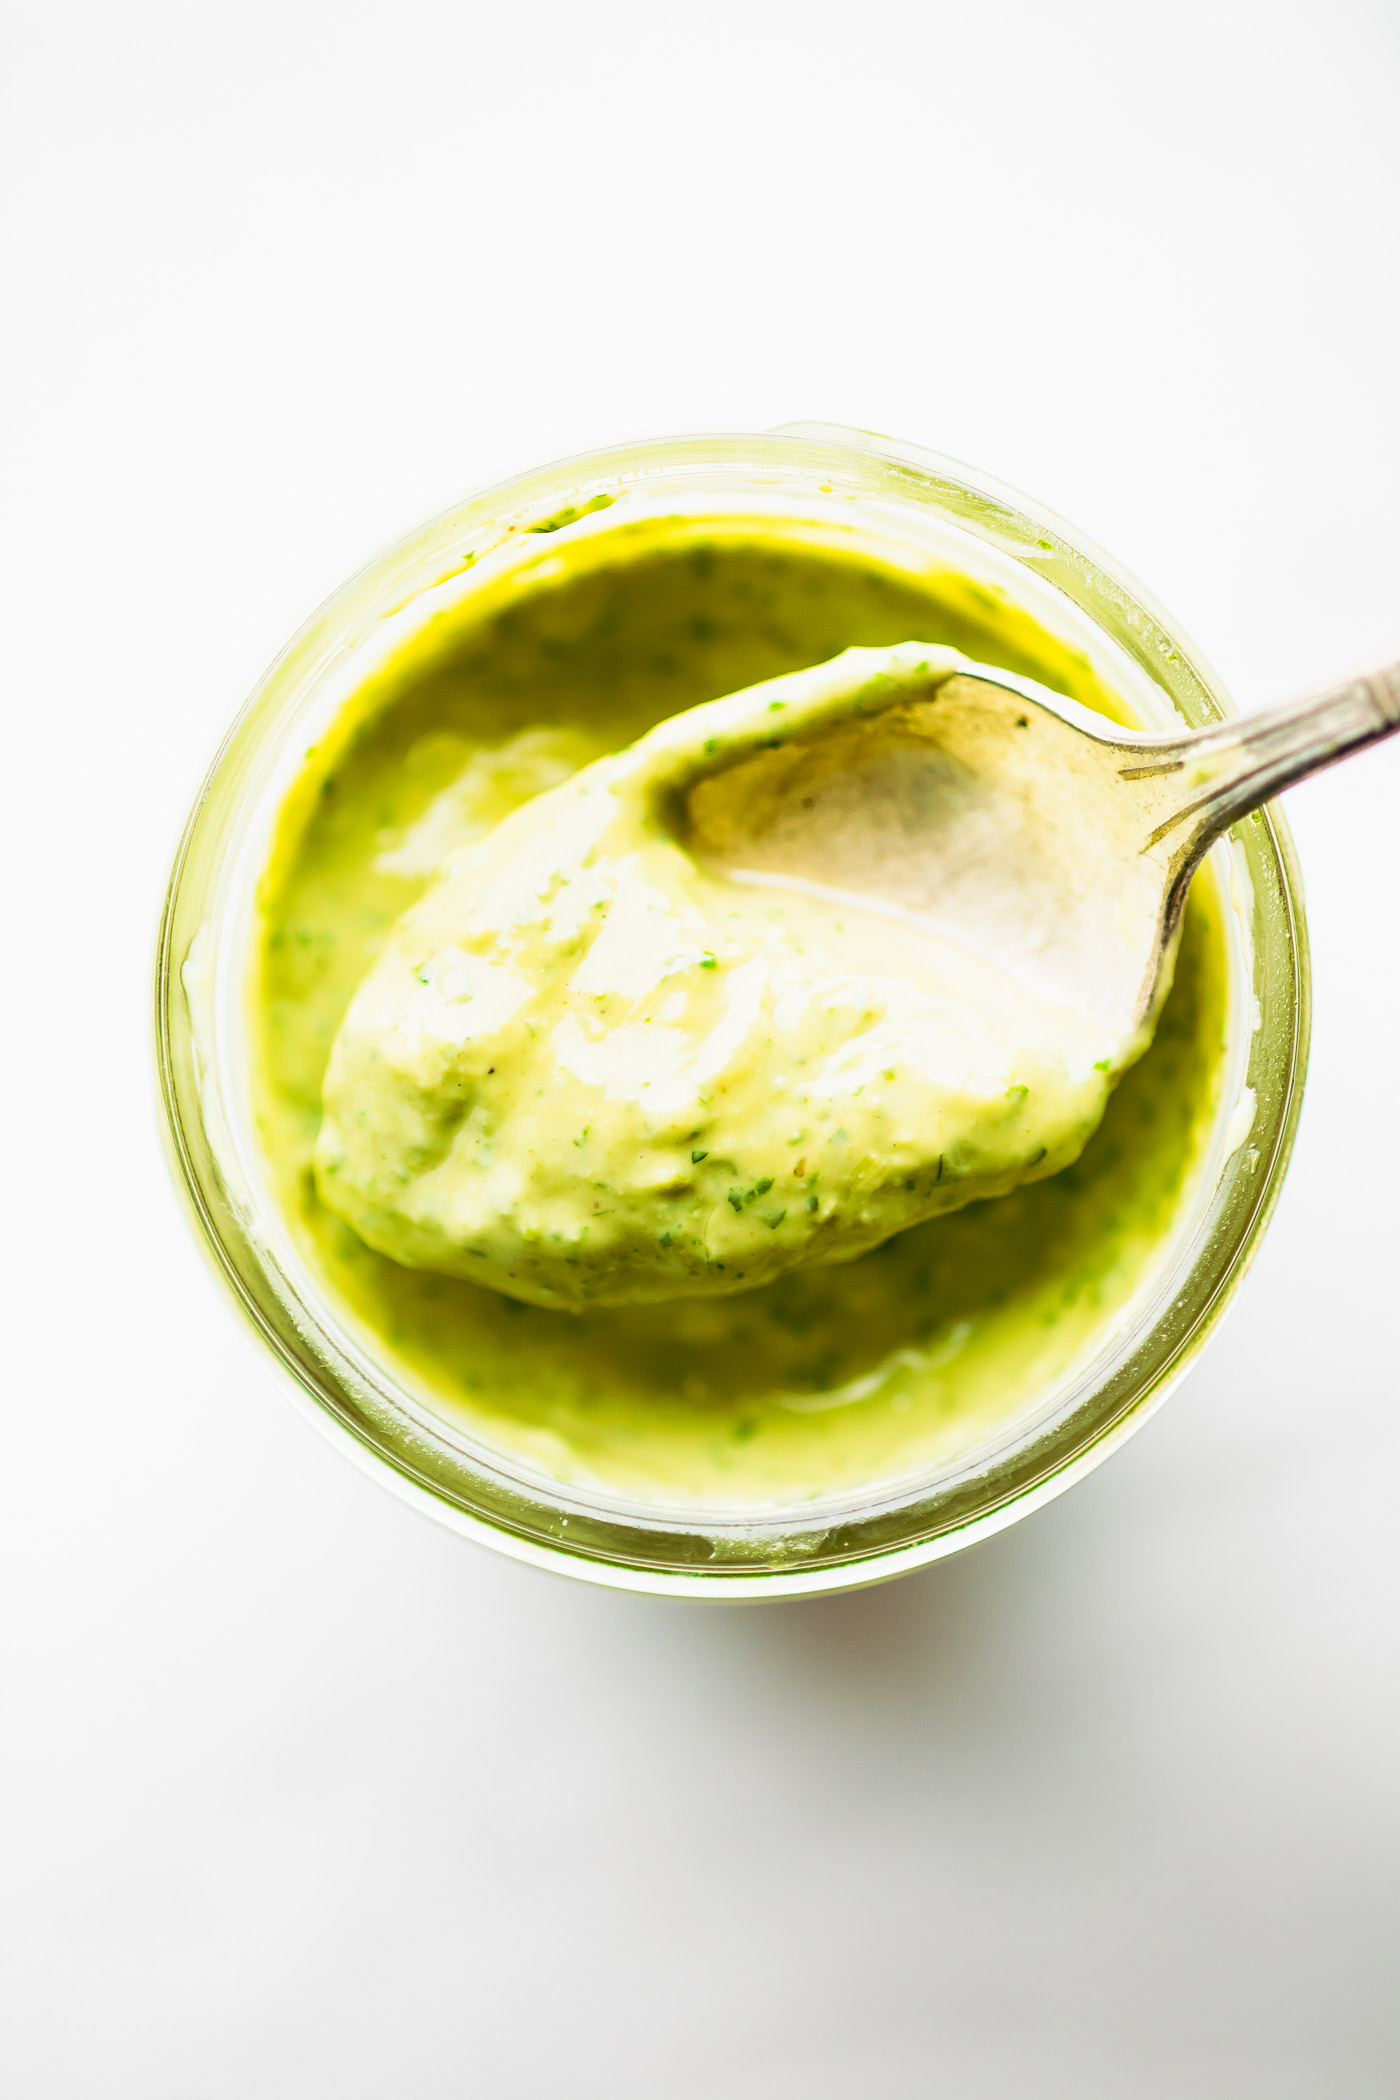 green goddess vegan dressing in a small glass jar with spoon with serving on it.